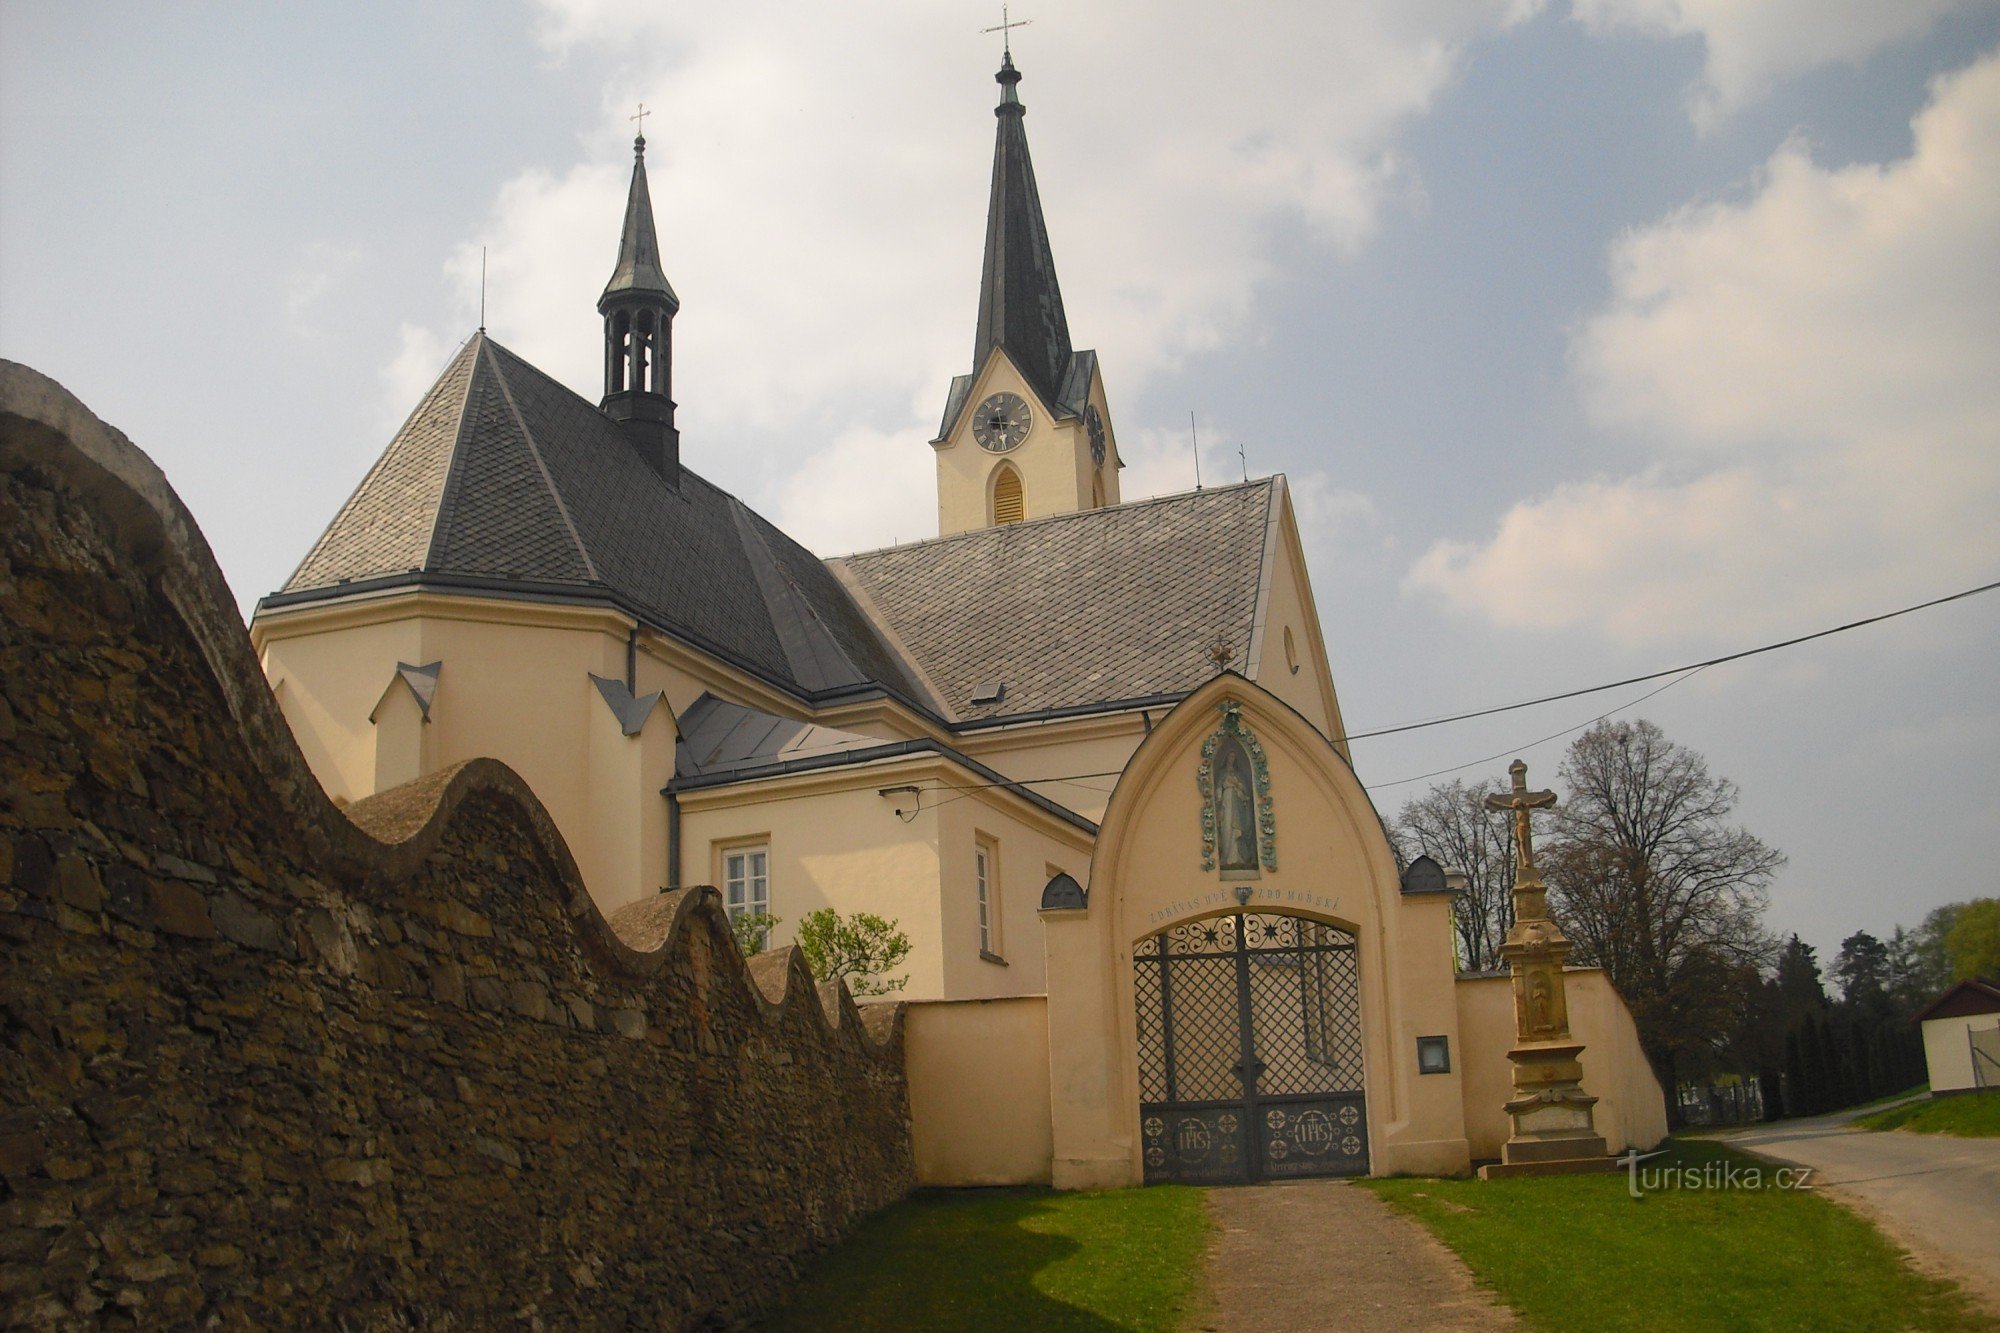 Pilgrimage Church of the Assumption of the Virgin Mary.